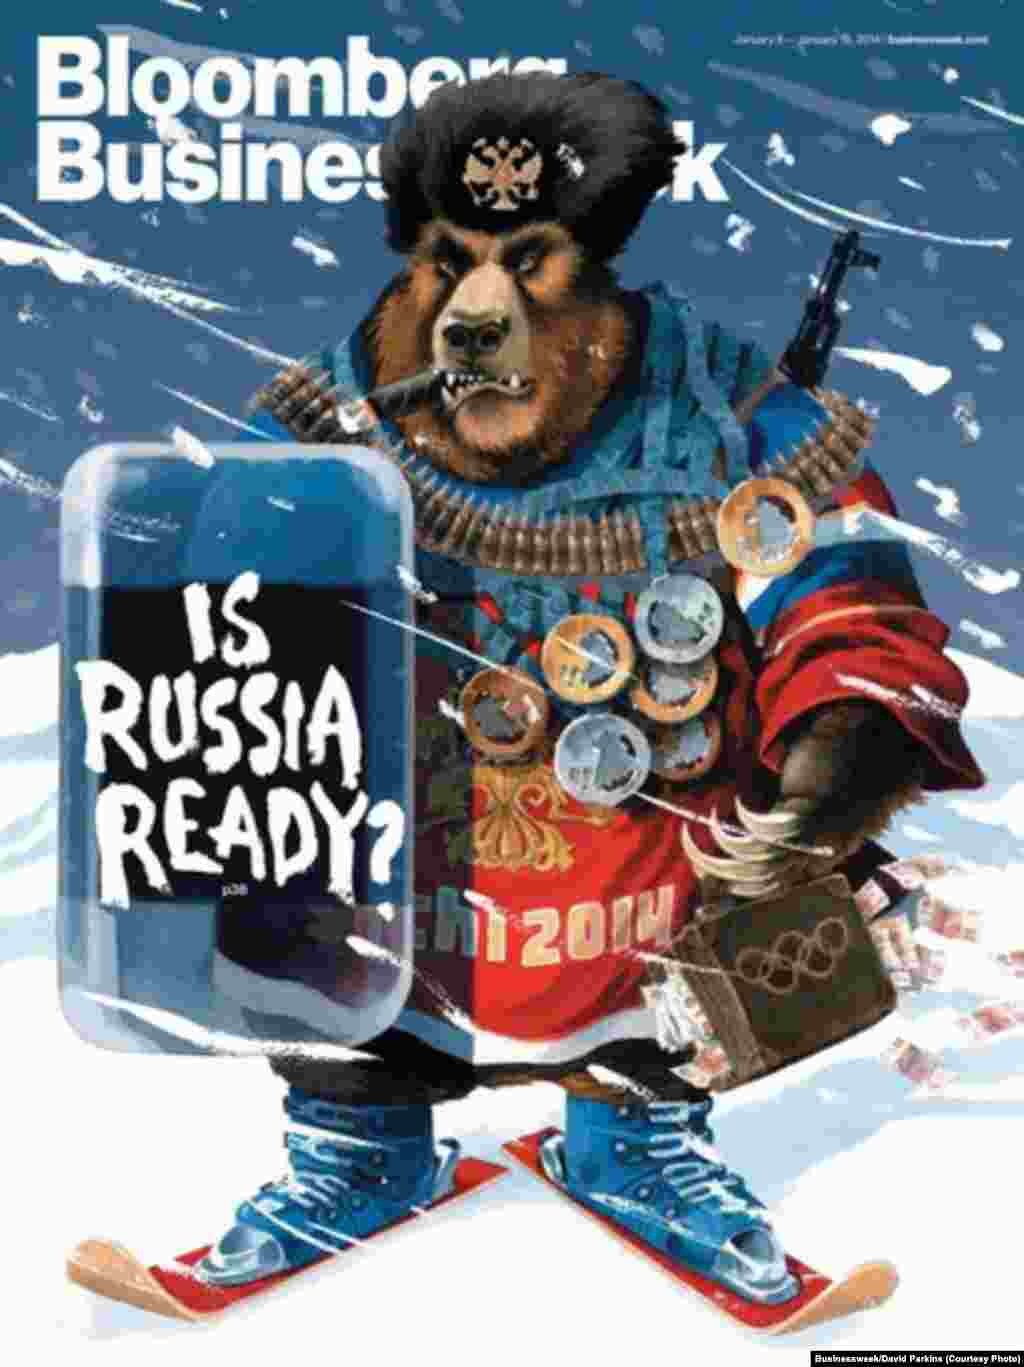 For Joshua Yaffa&#39;s cover story about corruption in preparation for the winter games, &quot;Bloomberg Businessweek&quot; uses a bear -- often seen as a symbol for Russia. The magazine explained that other cover ideas fell flat.&nbsp;